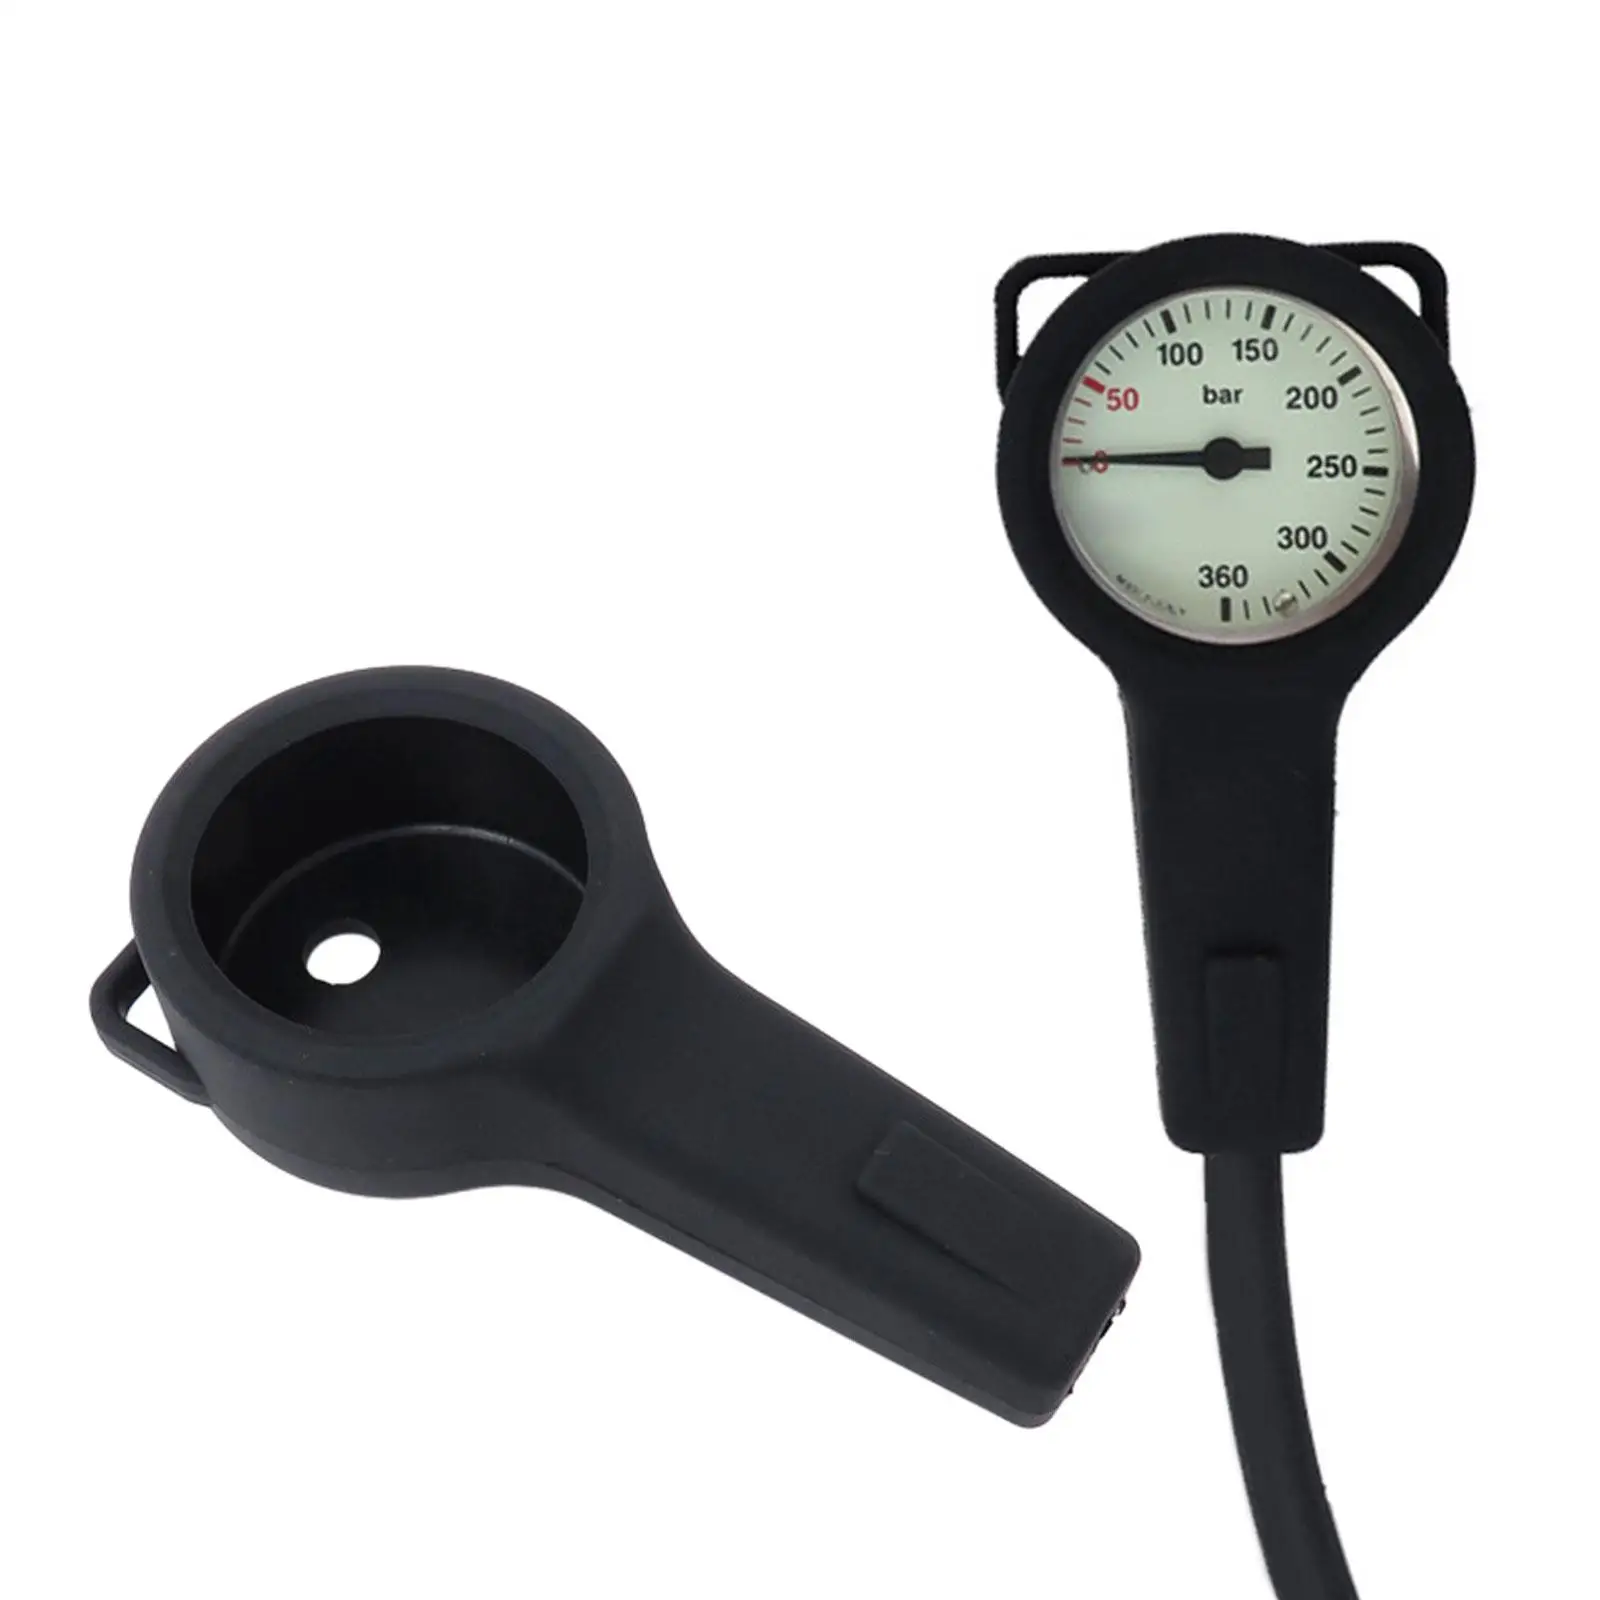 Scuba Pressure Gauge Boot Spg Submersible Pressure Gauge First Stage Metal High Pressure Gauge with Loops Protector Rubber Cover